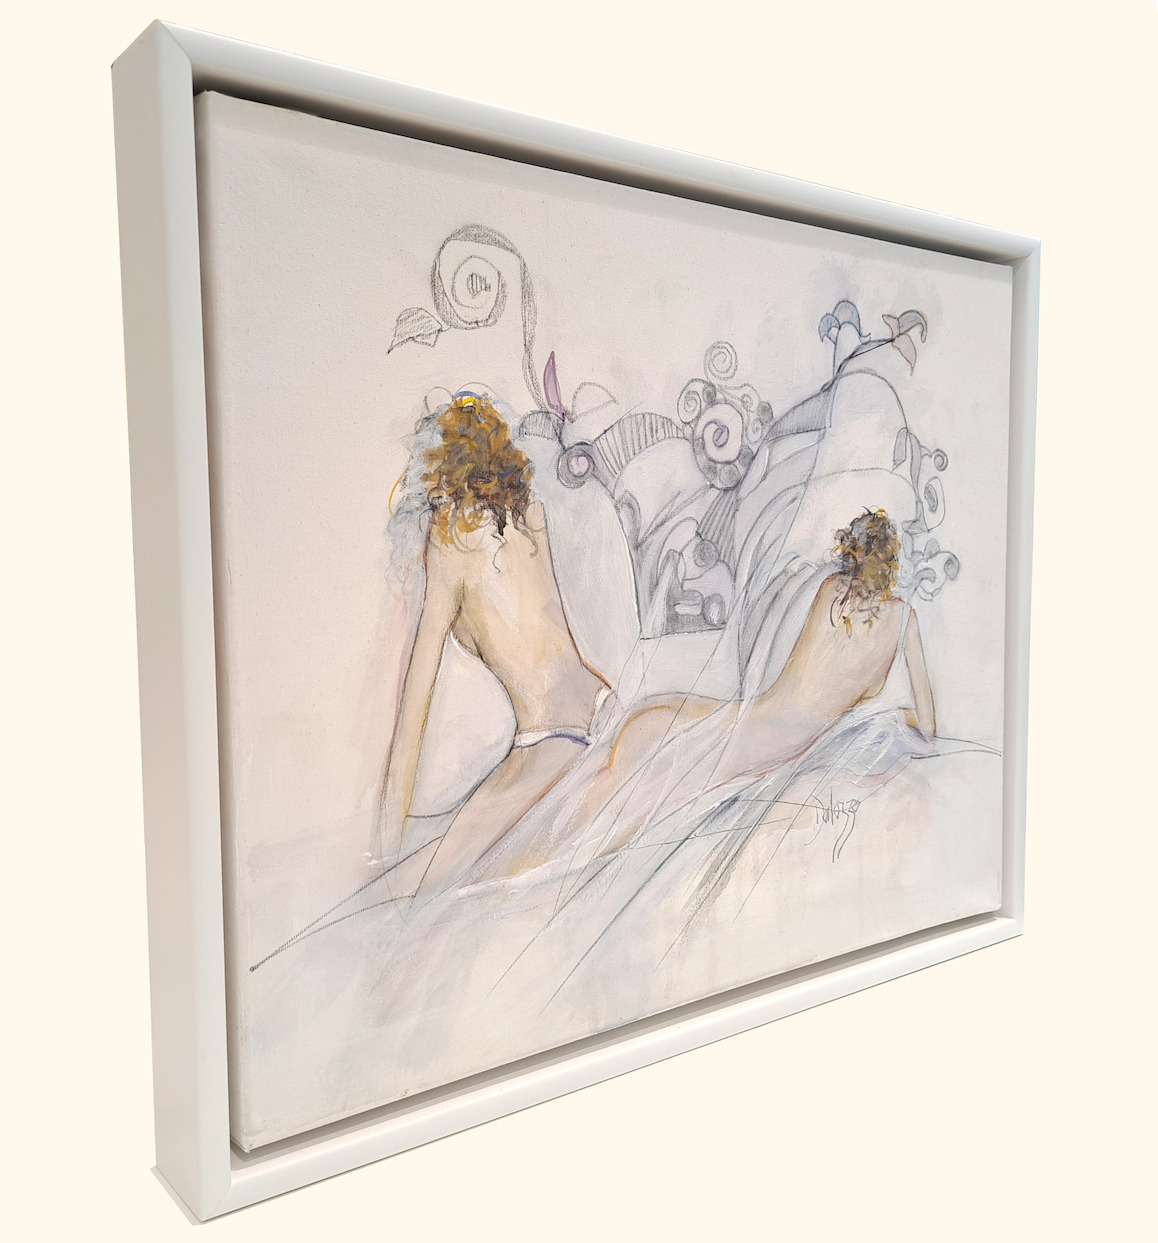 Framed Side View Of Nude Painting "Sun Bathers" By Lucette Dalozzo